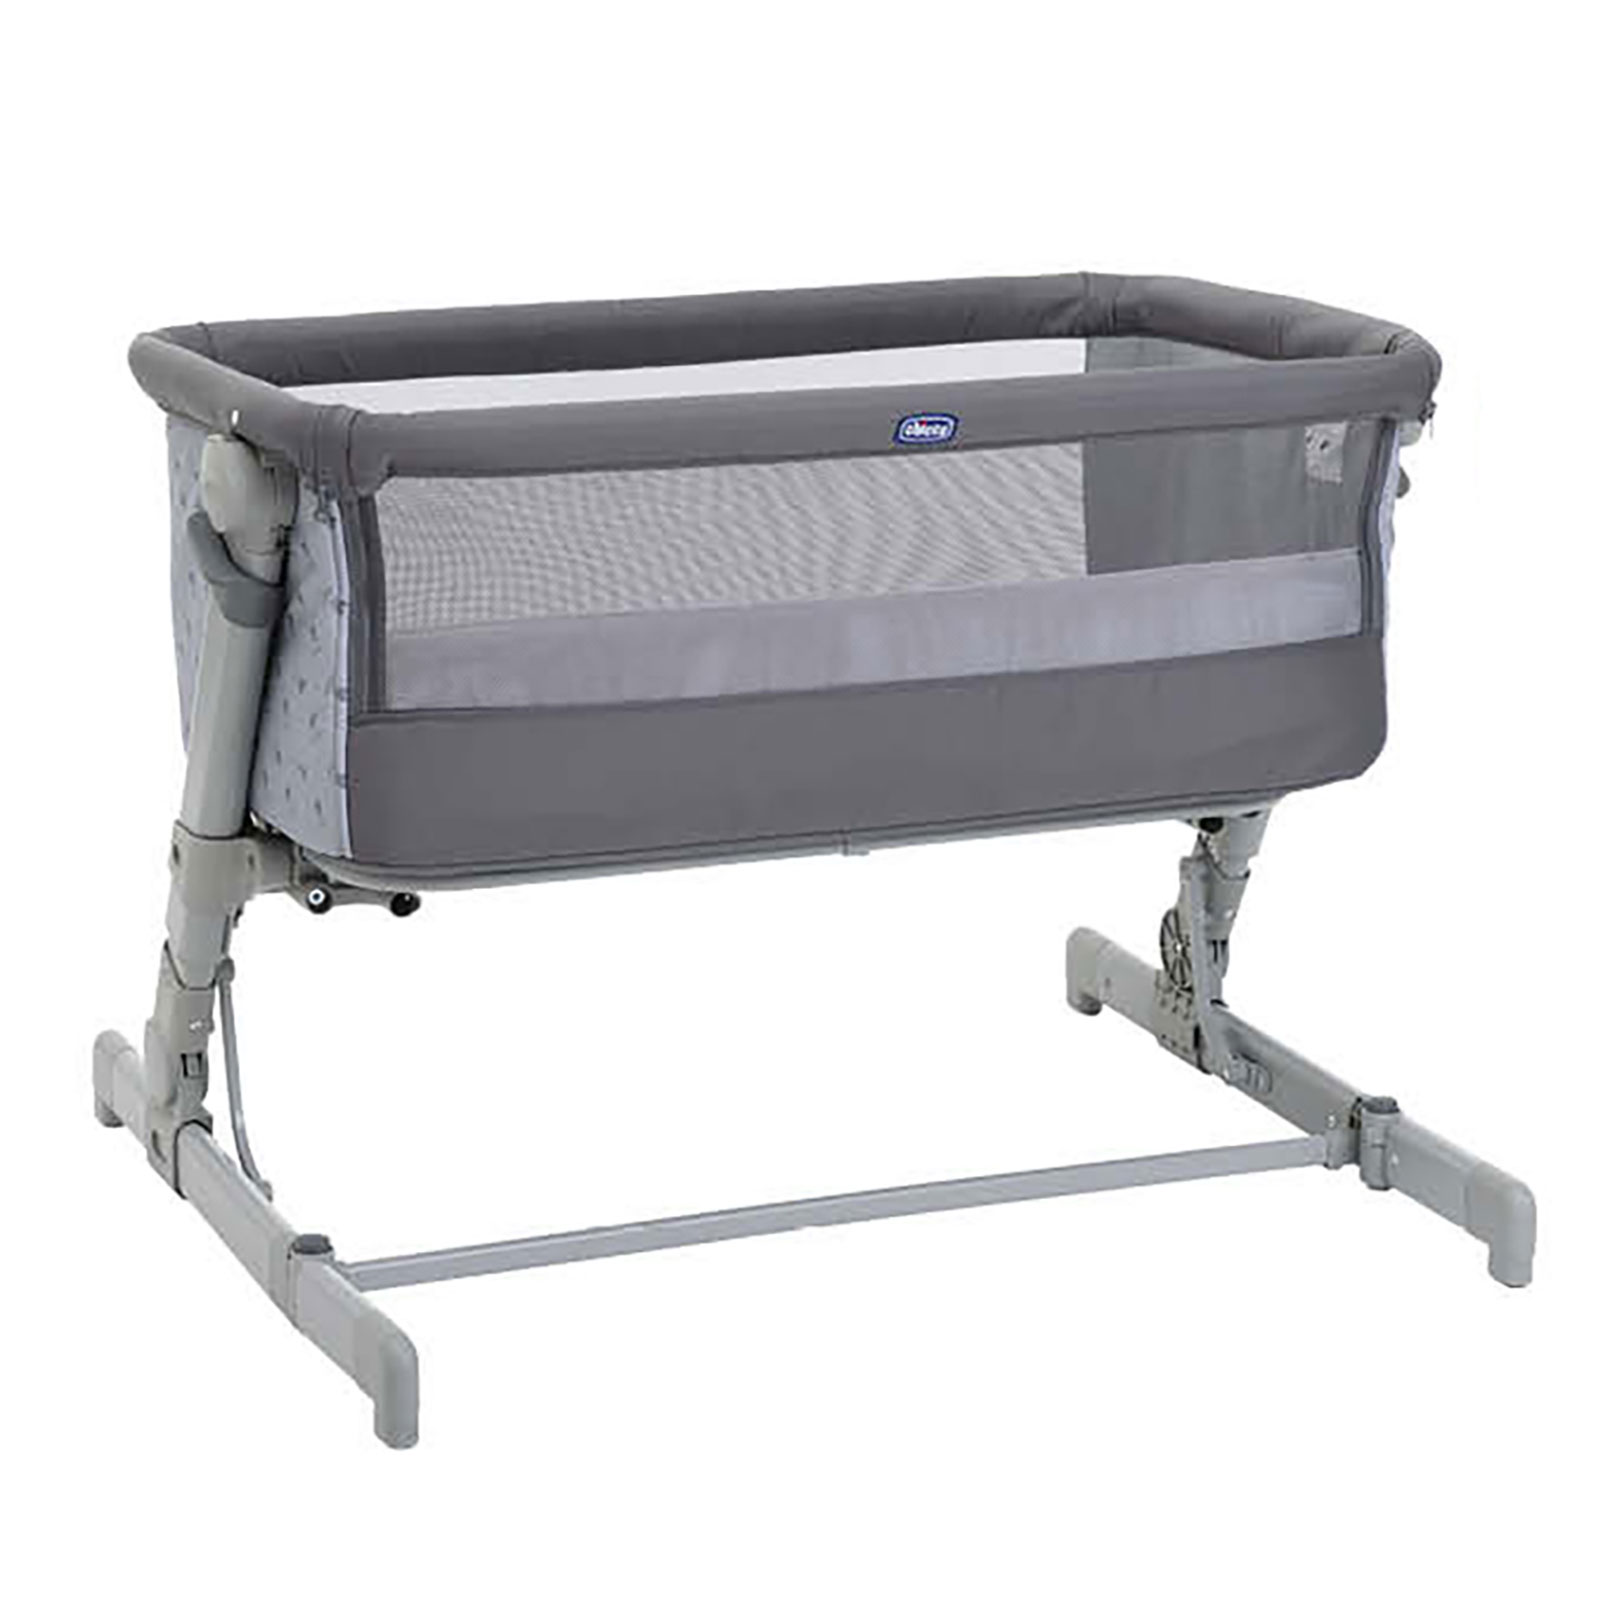 Chicco Next2me Crib for sale online